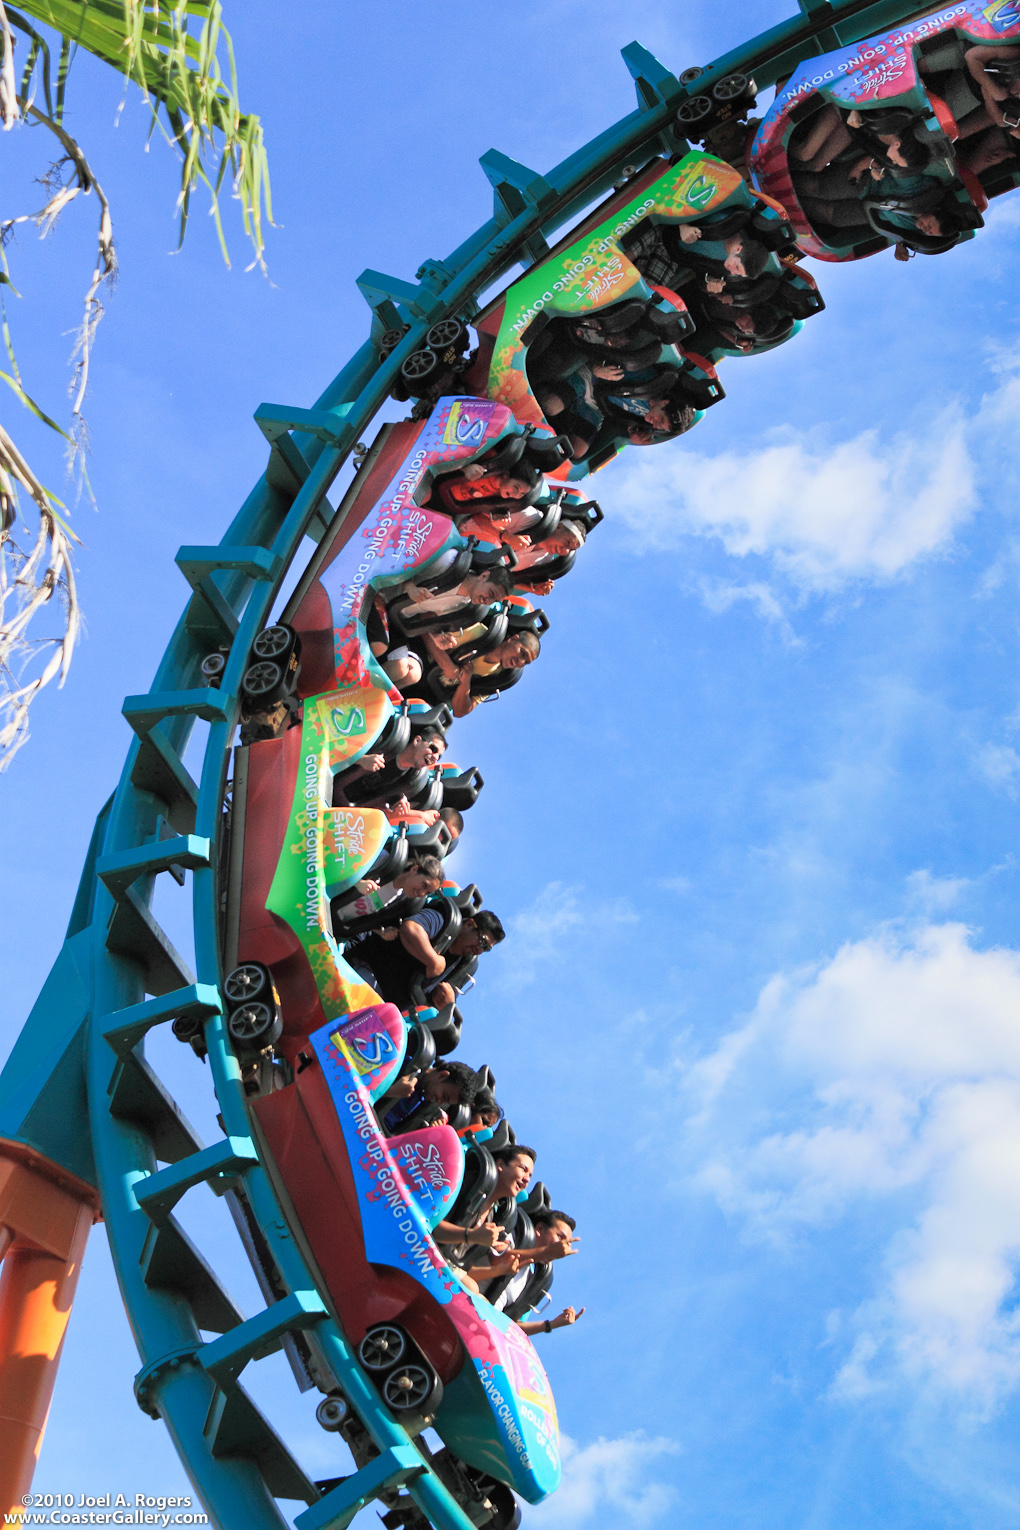 Stock image of a roller coaster covered in advertising